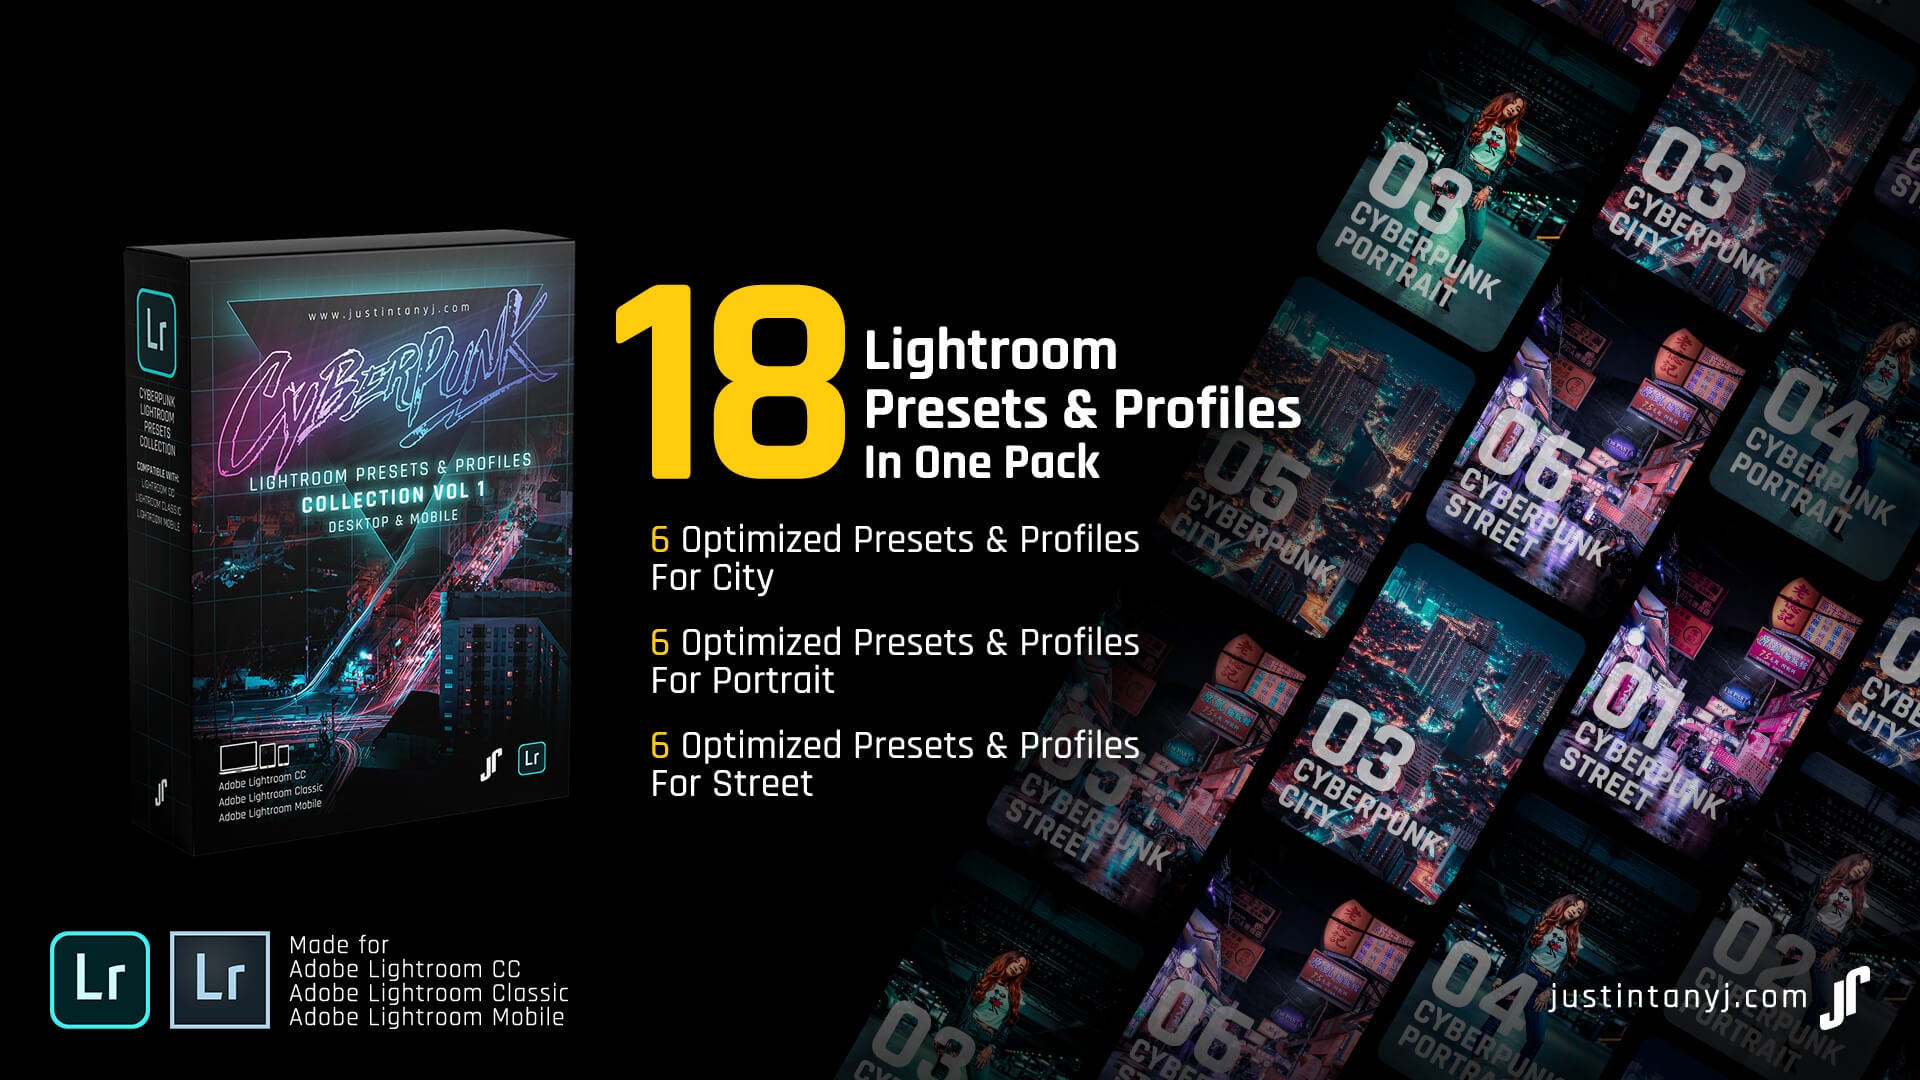 Cyberpunk Lightroom Presets And Profiles Collection Vol 1